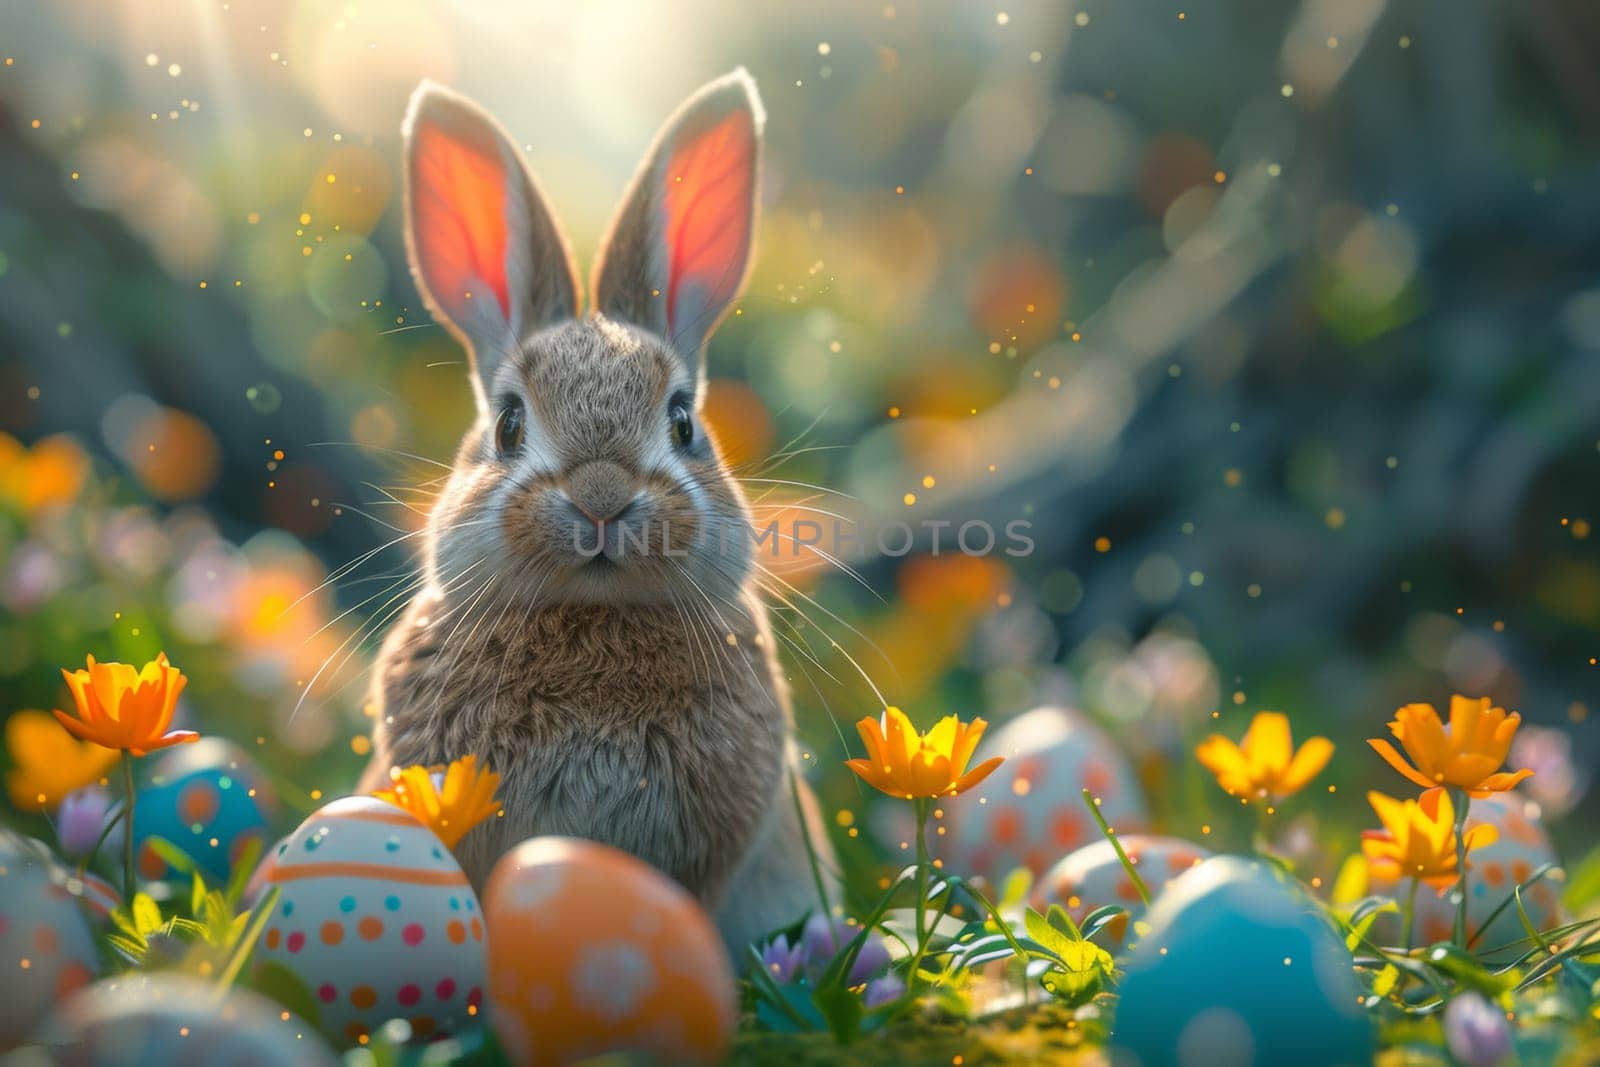 A rabbit is standing in a field of flowers and eggs by nateemee